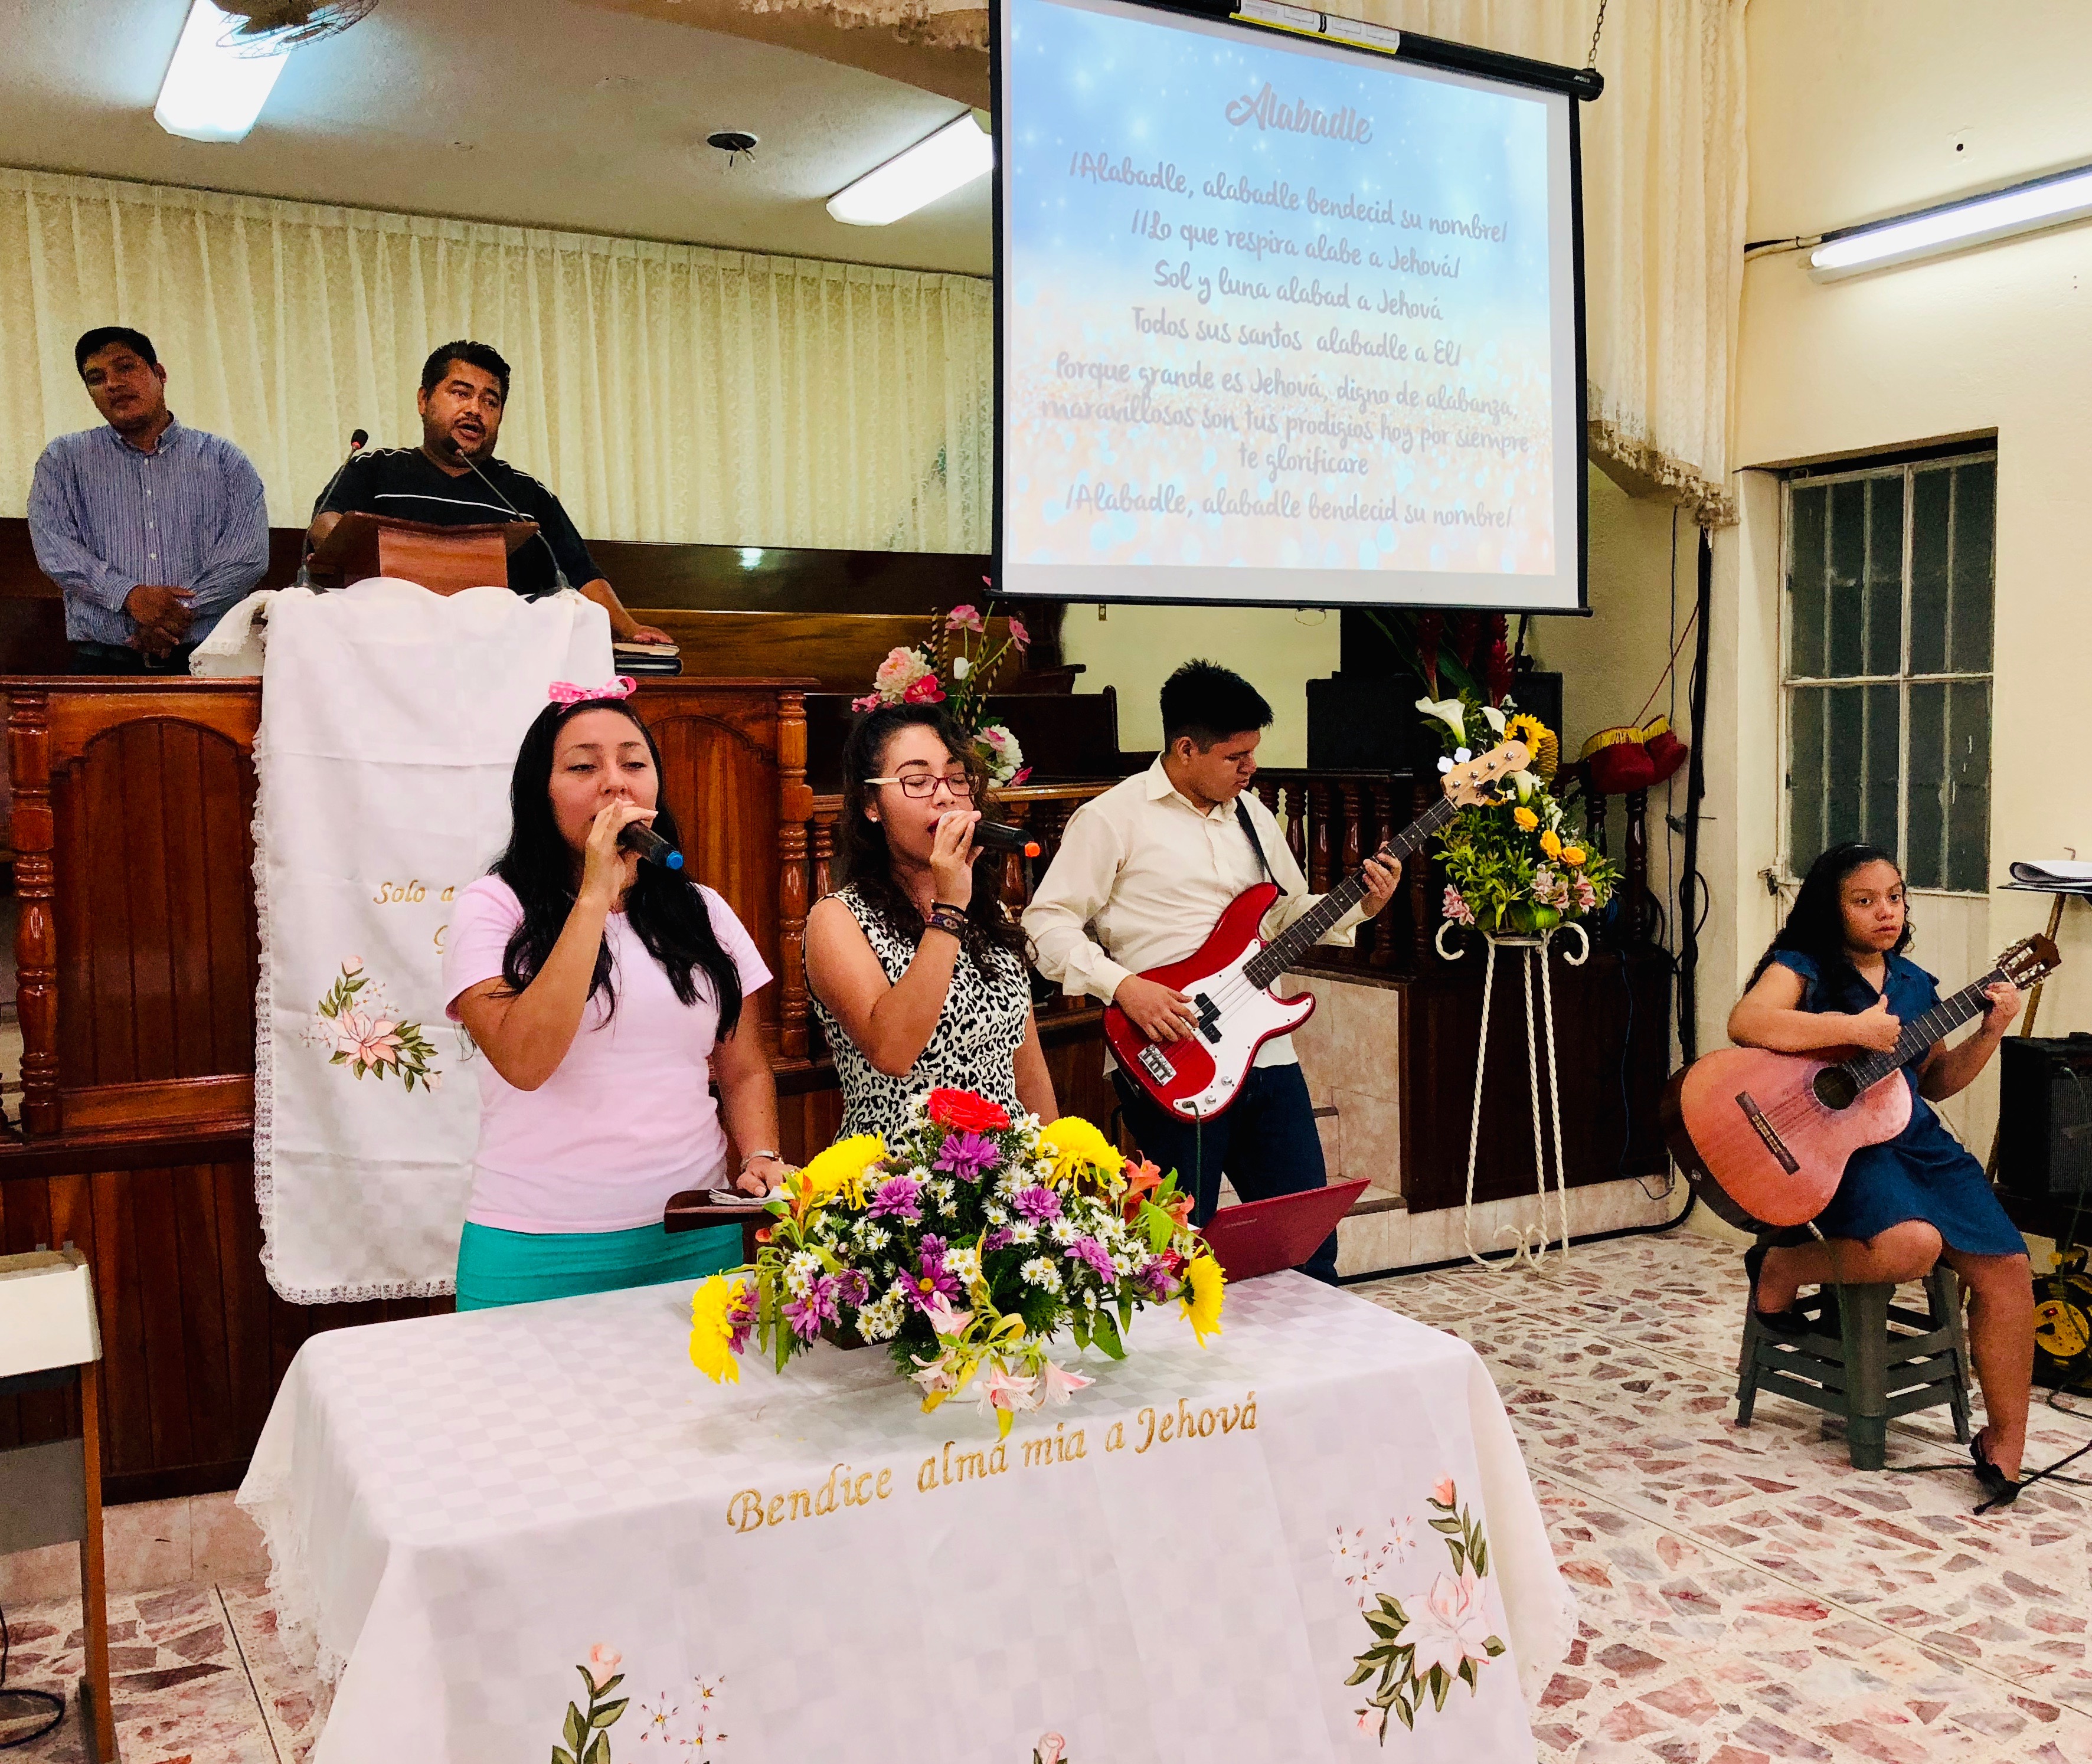 The Youth leading us in worship at the mother church where Luis is pastor